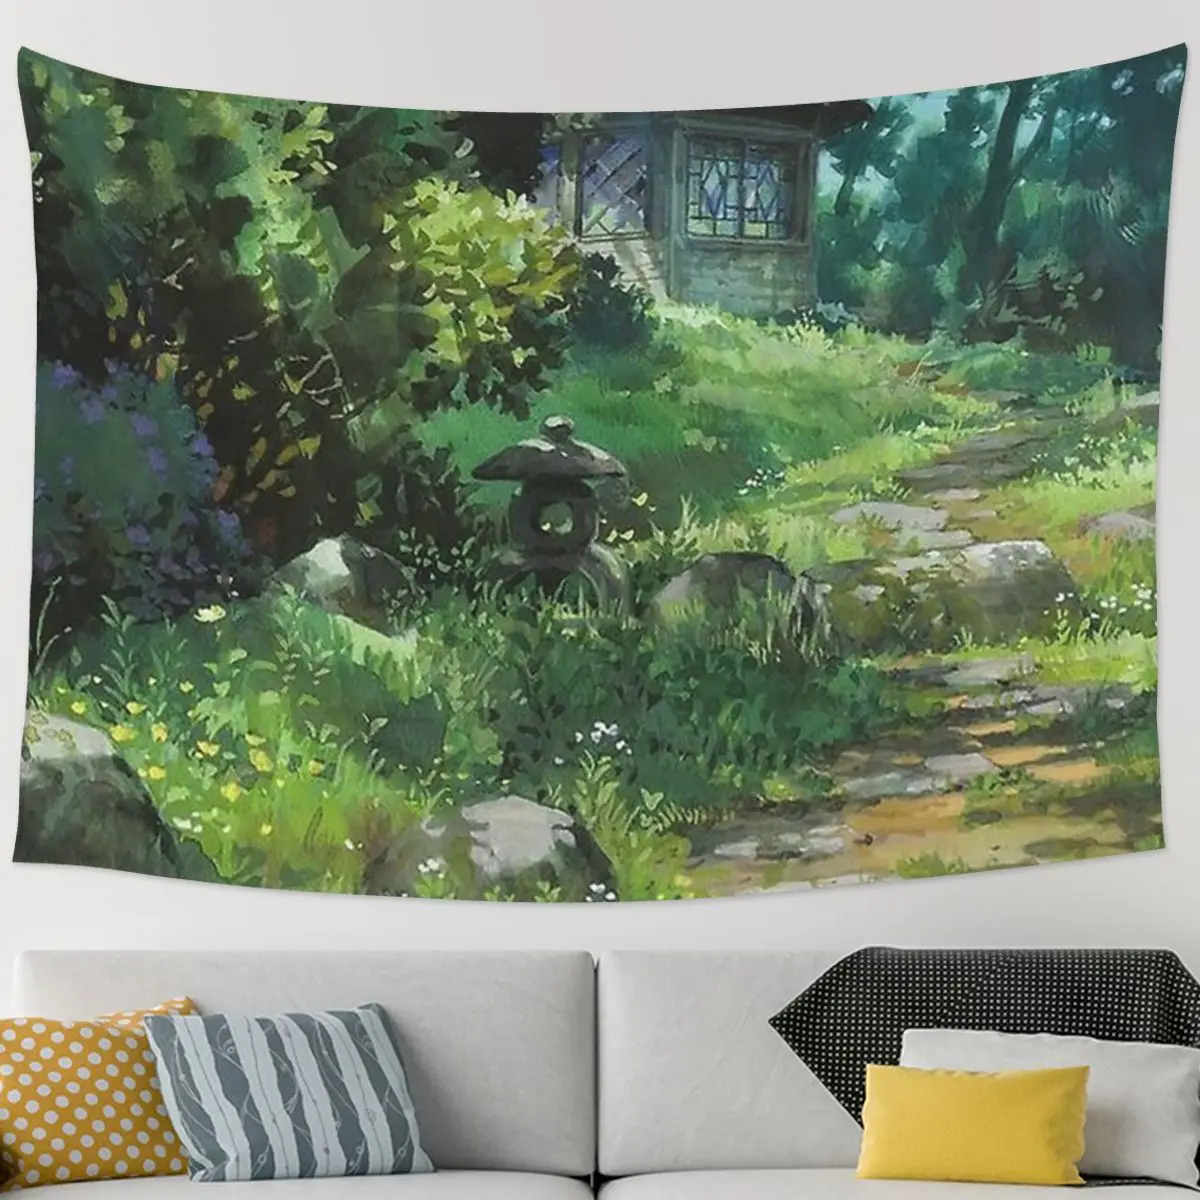 

Anime Magical Forest Scenery Tapestry Funny Wall Hanging Aesthetic Home Decoration Tapestries for Living Room Bedroom Dorm Room